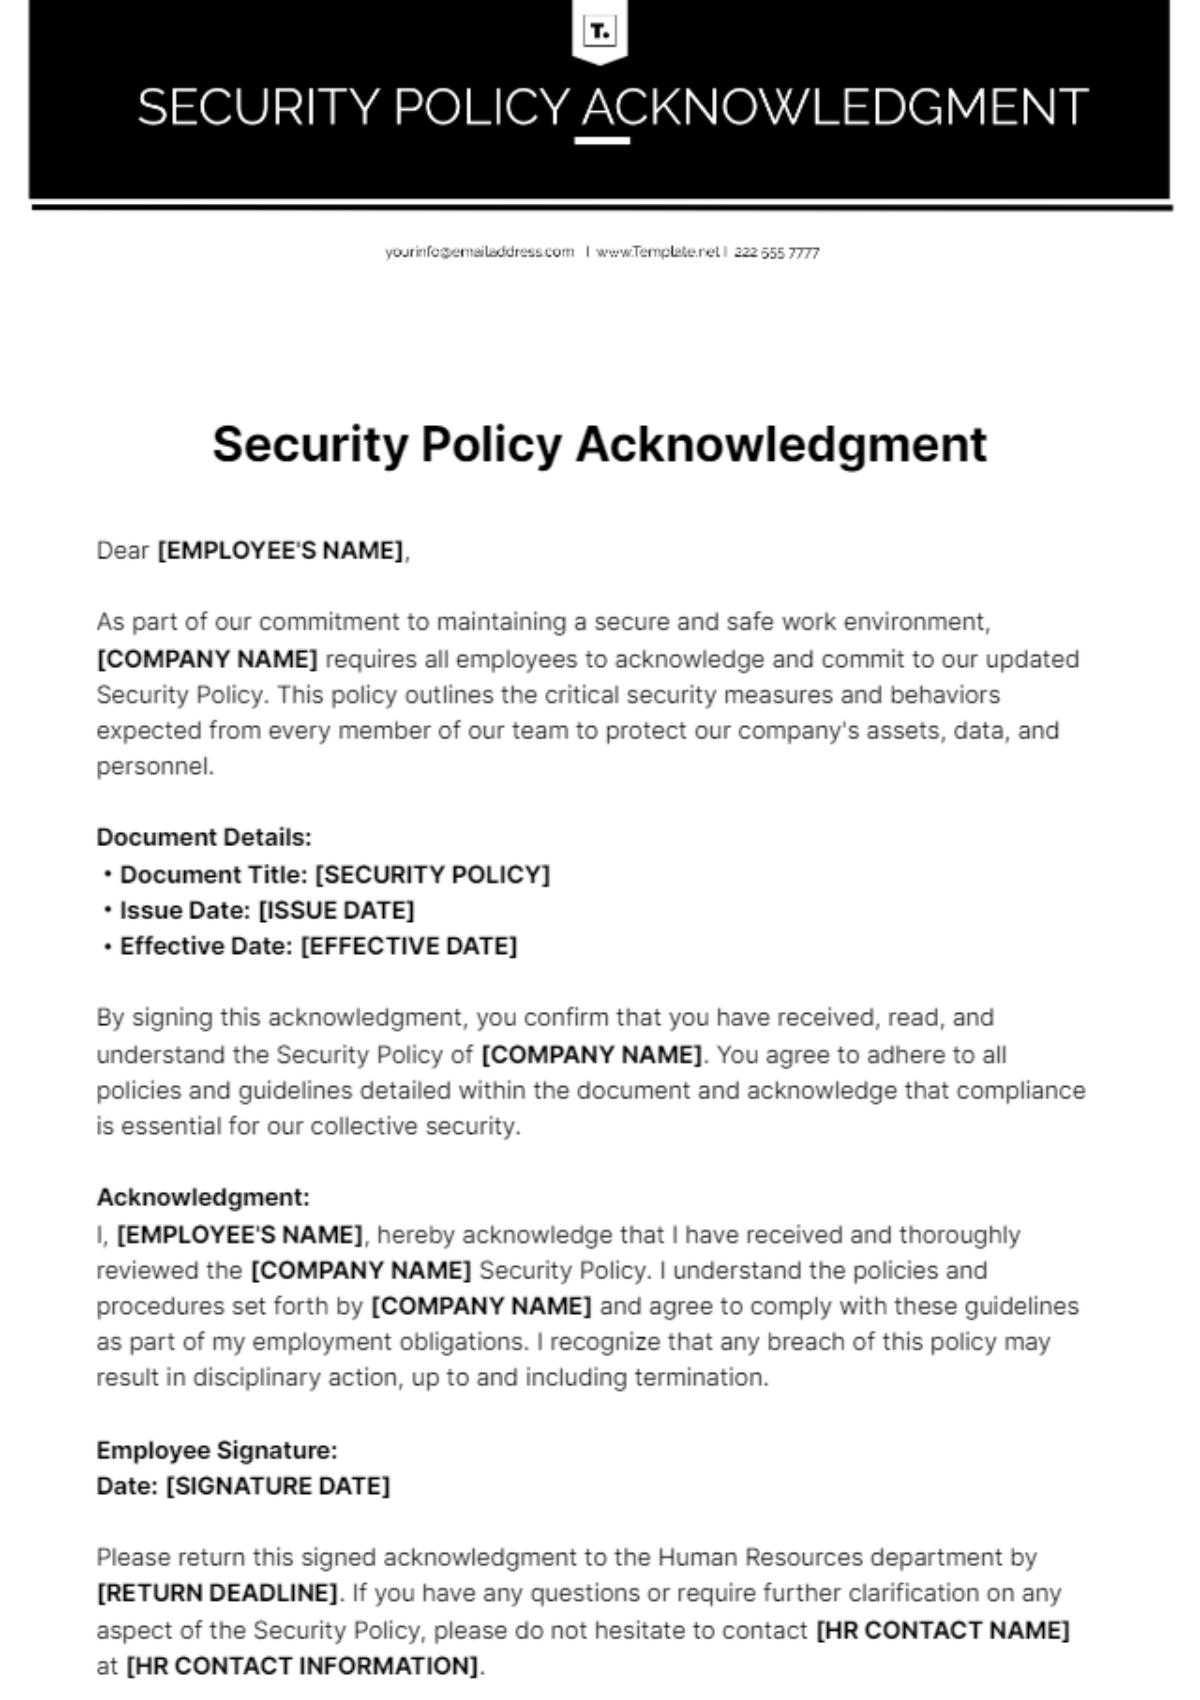 Security Policy Acknowledgment Template